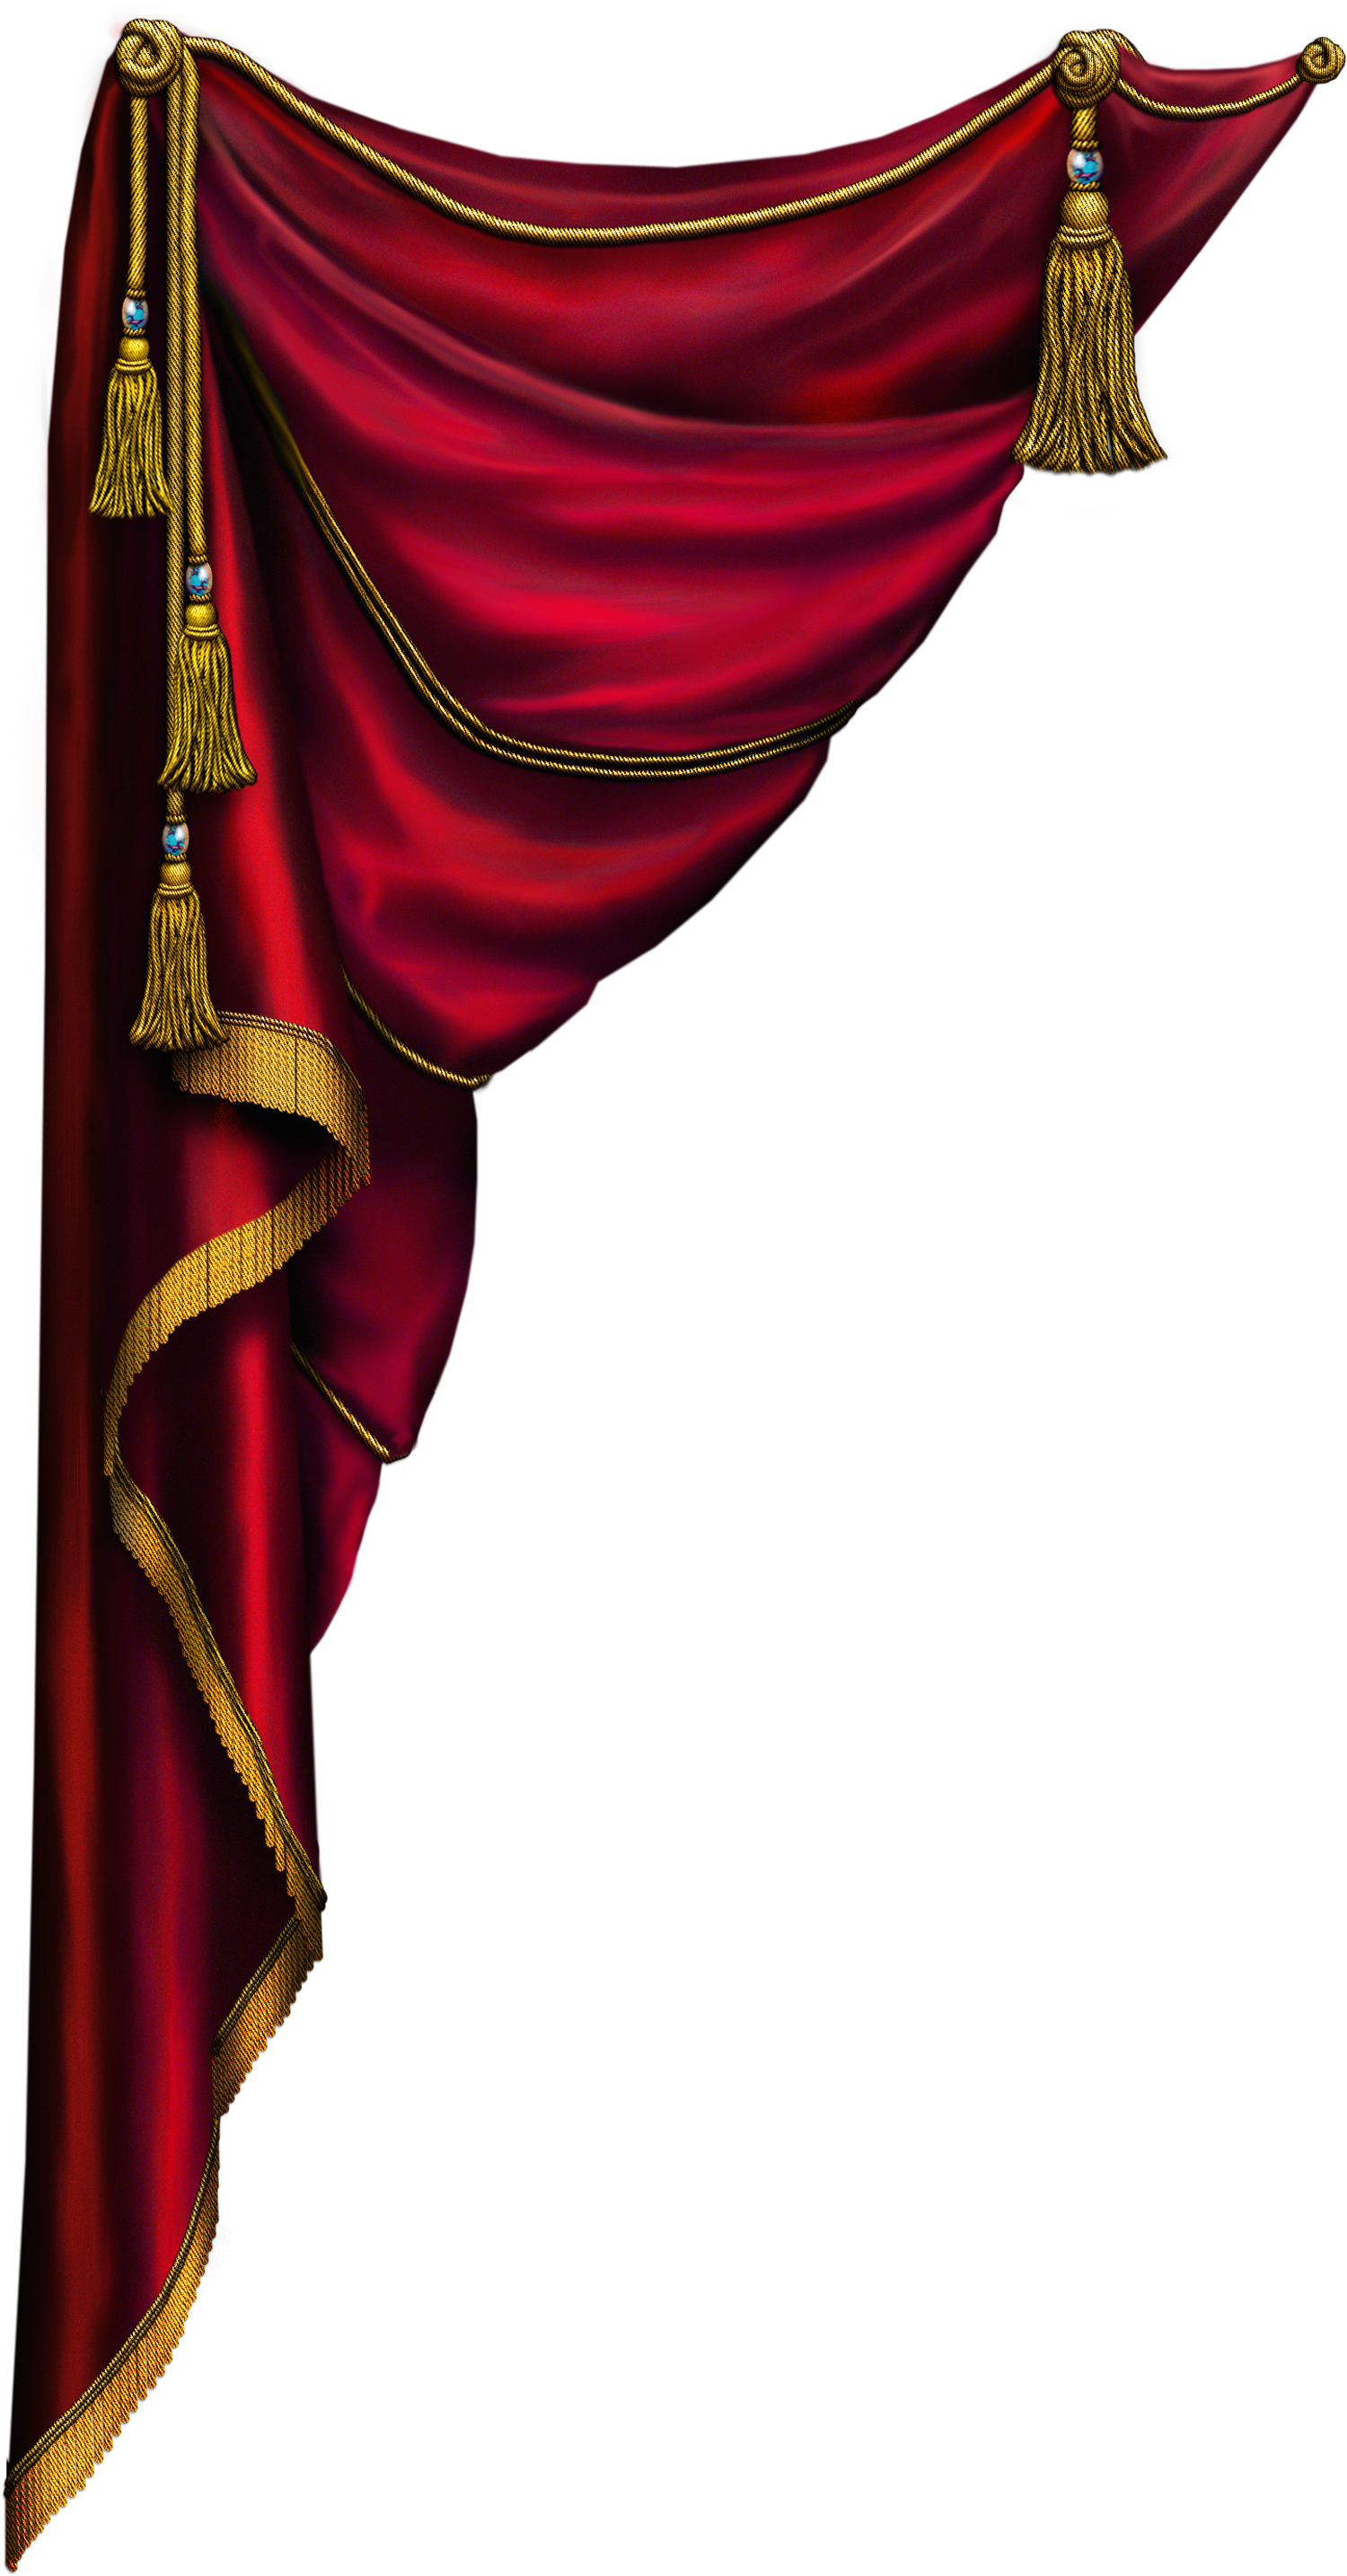 A Red Curtain With Gold Tassels